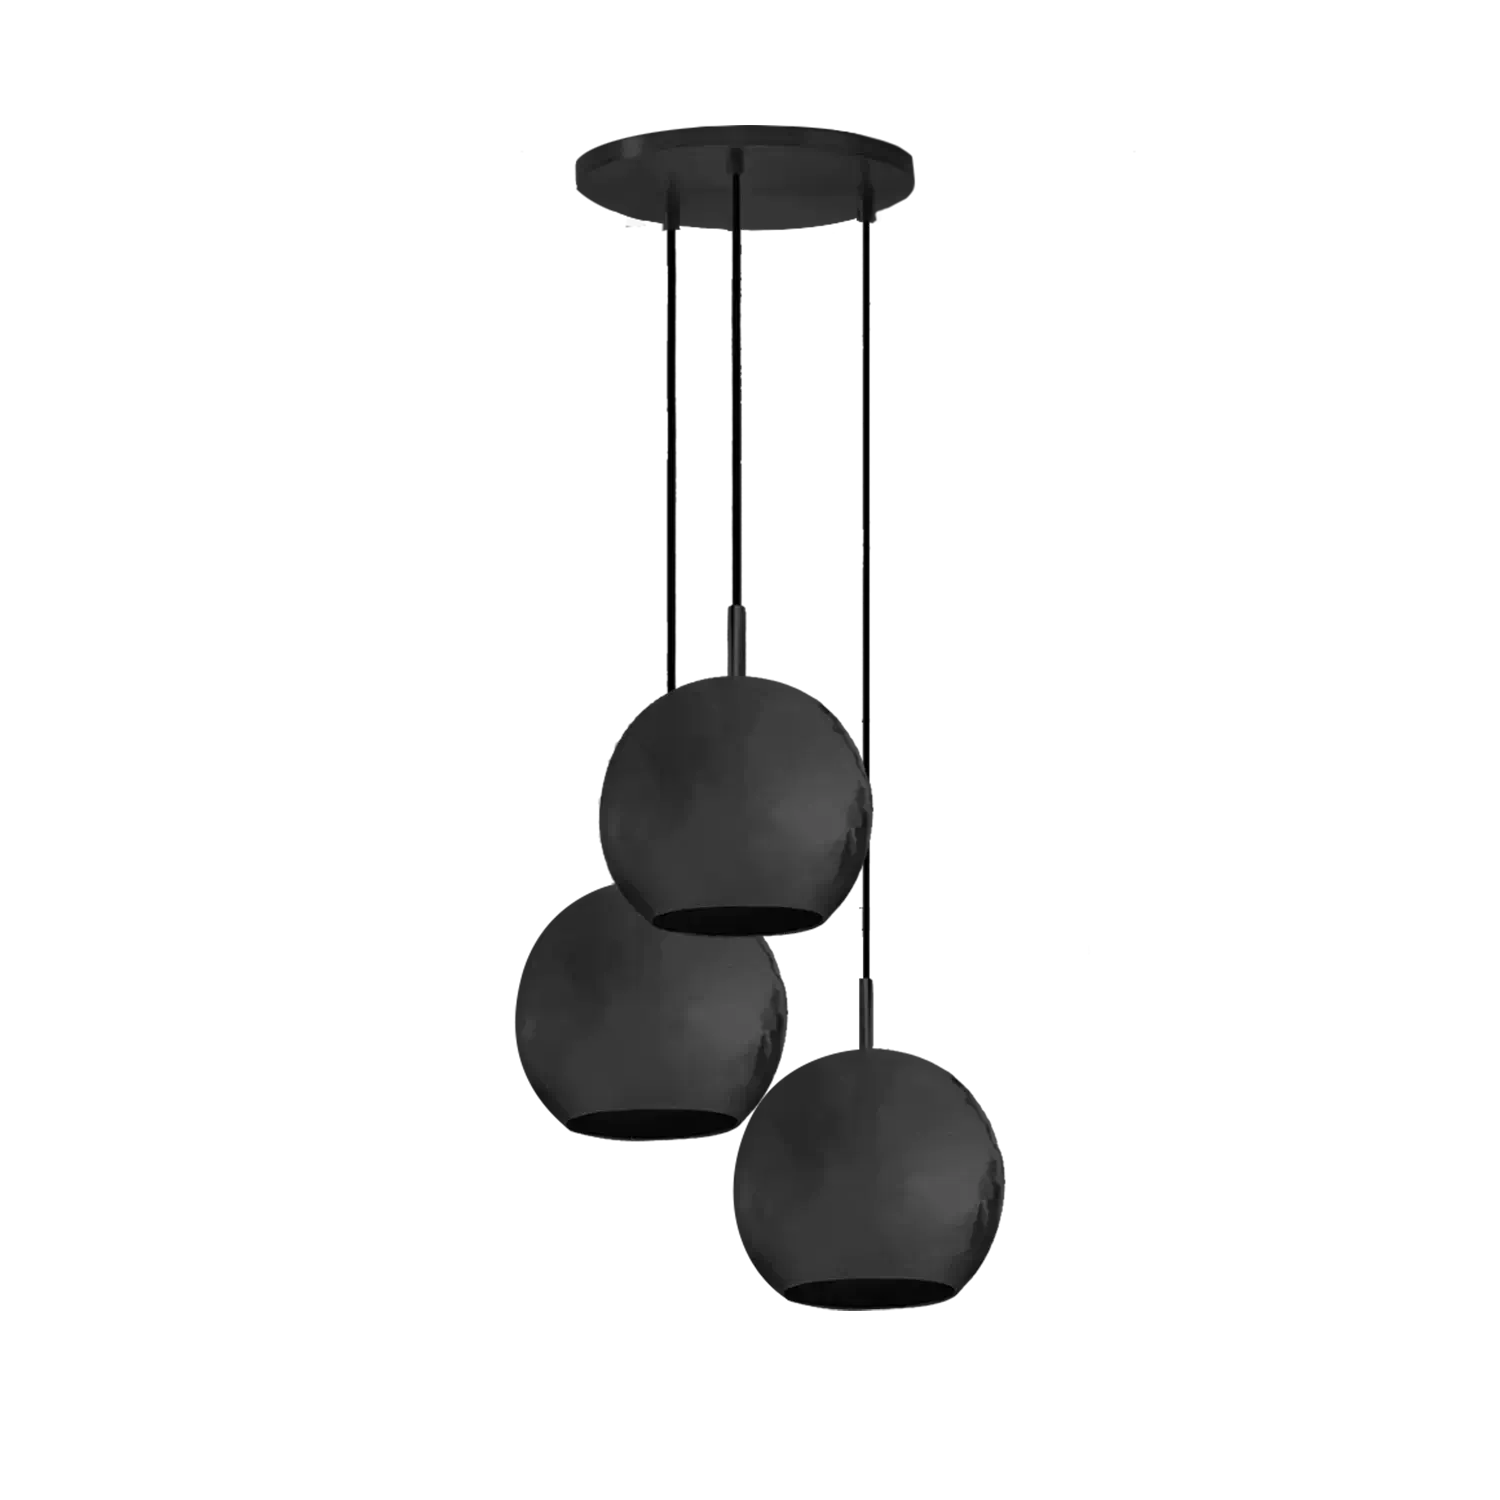 Dounia home chandelier in black made of Metal, Model: Mishal